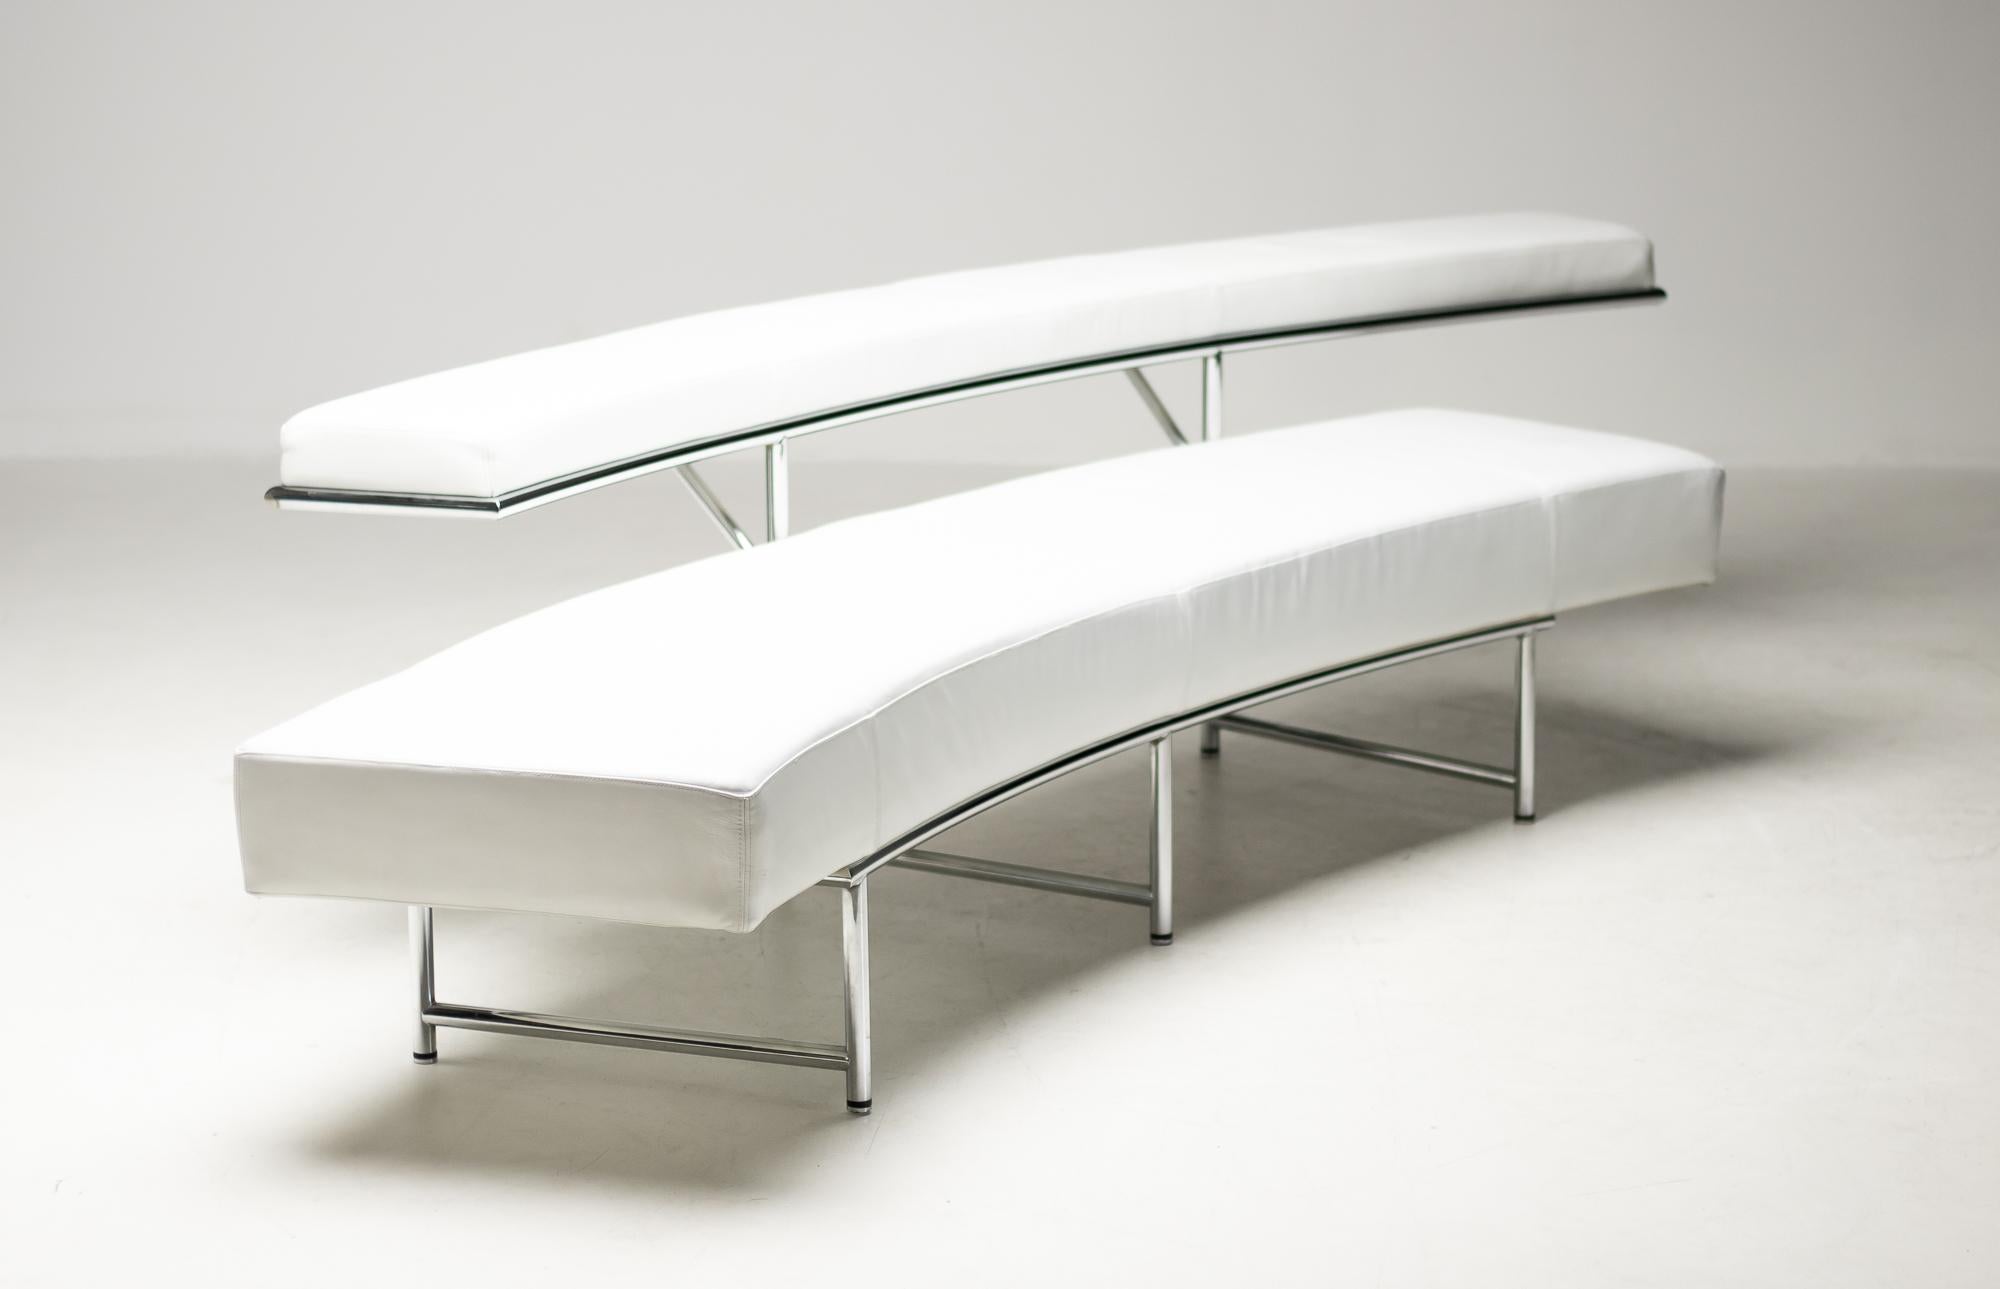 Eileen Gray’s perhaps most exclusive sofa radiates an allure from which no beholder can escape.
The soft curve, the most unusual lines of the backrest make the Monte Carlo an incomparable and striking one of a kind in the history of 20th century